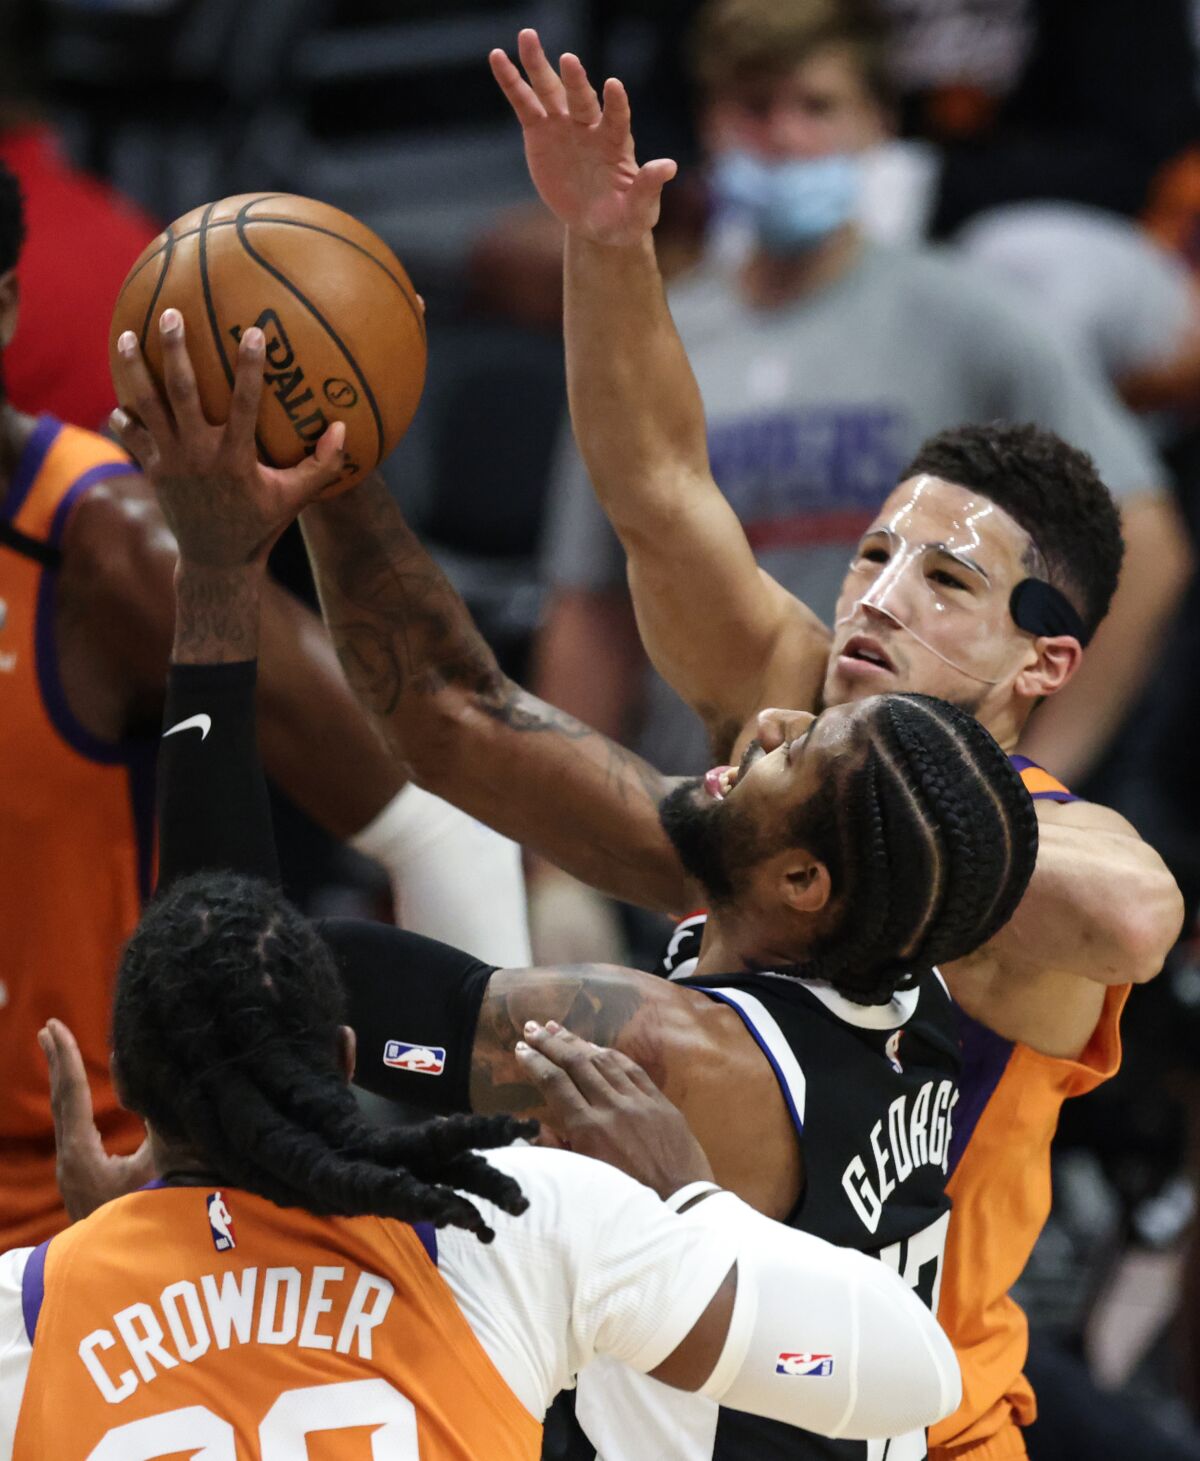 Clippers forward Paul George tries to power his way to a shot against Phoenix's Devin Booker and Jae Crowder.